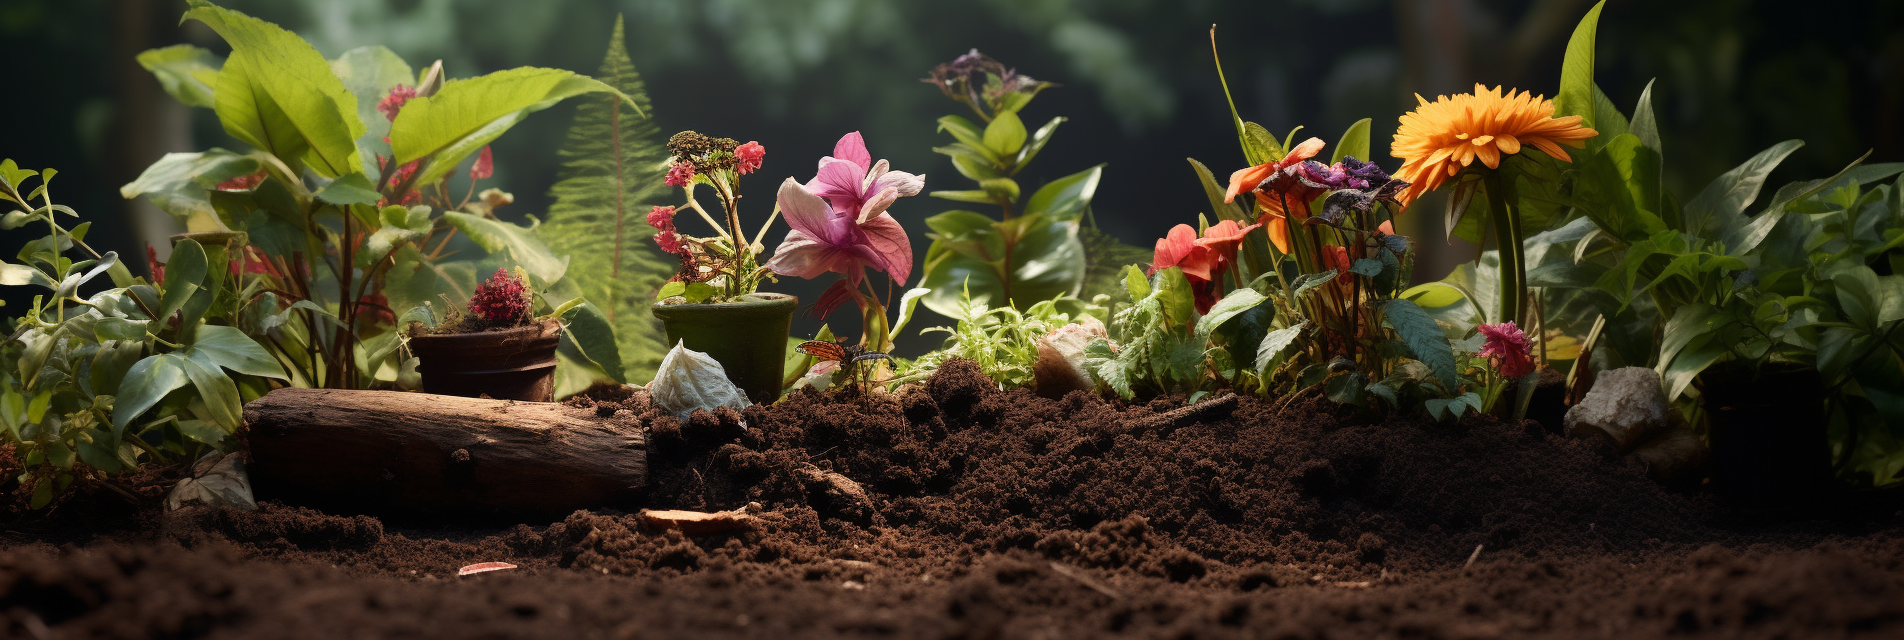 6 steps to make successful composting easy